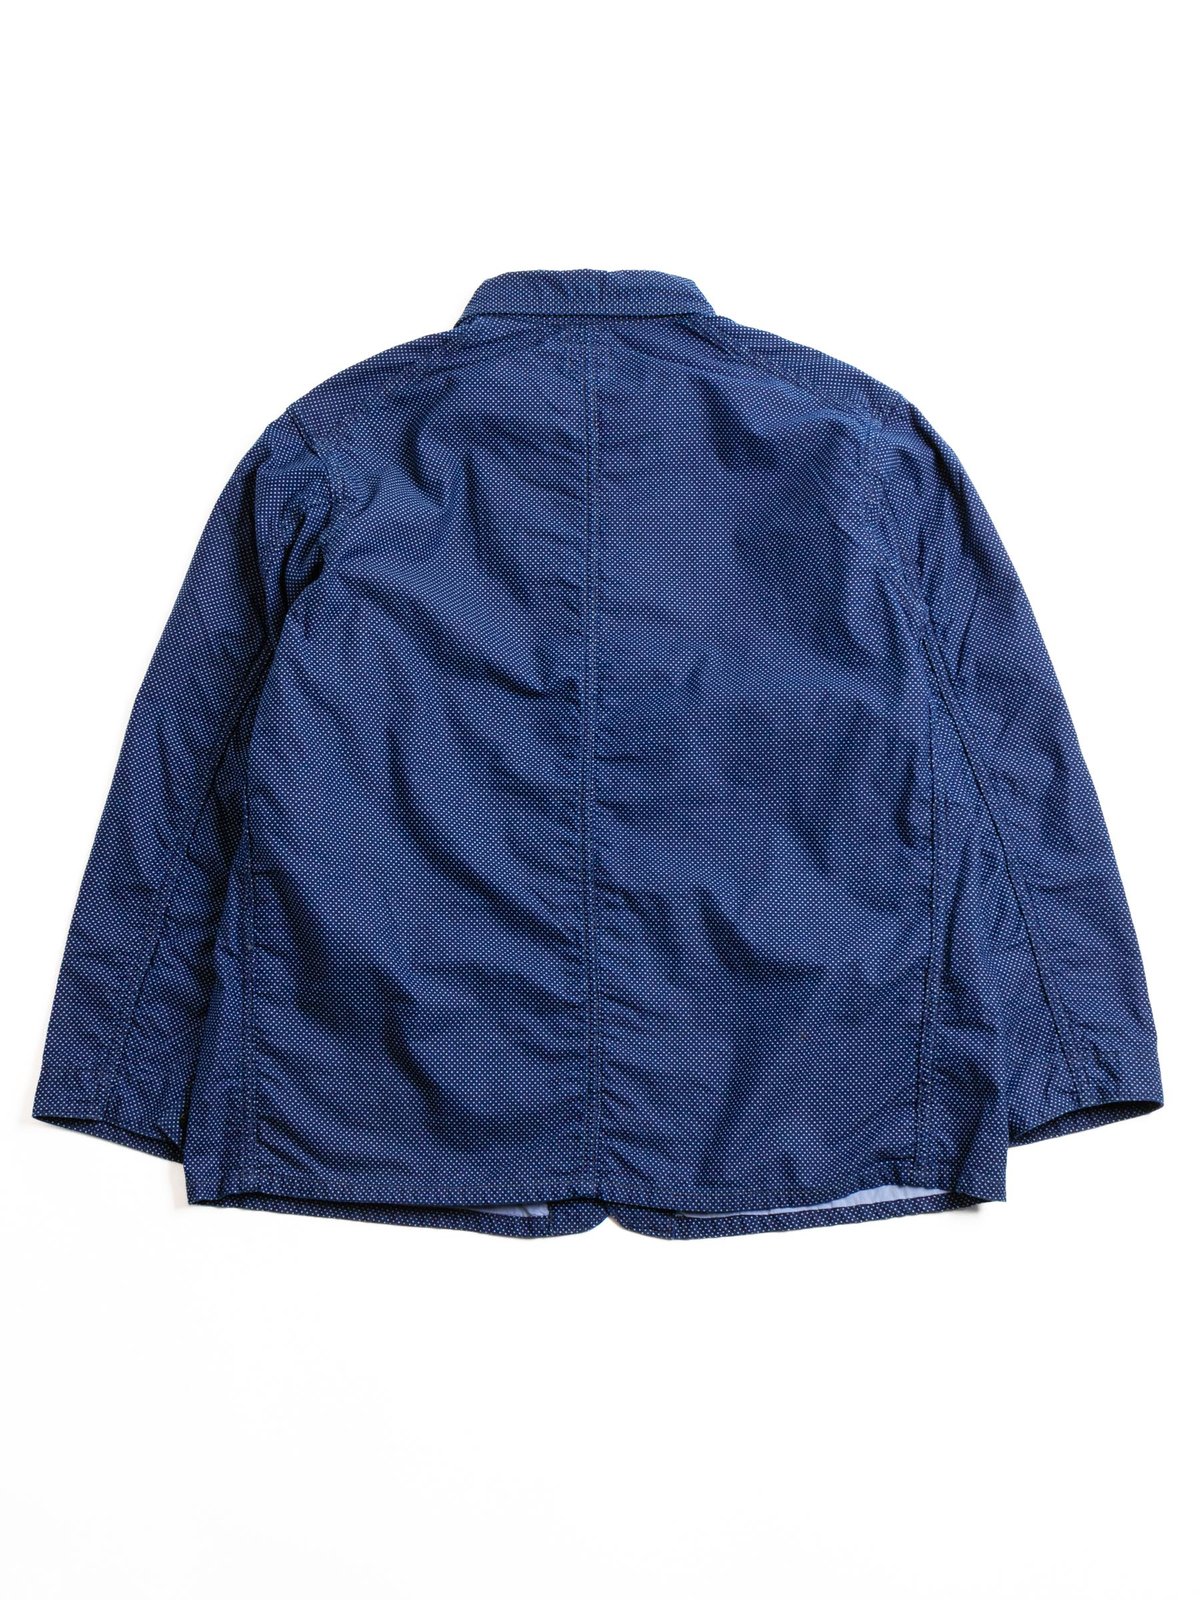 LINED No1 JACKET DOT X FEATHER CHAMBRAY - Image 4